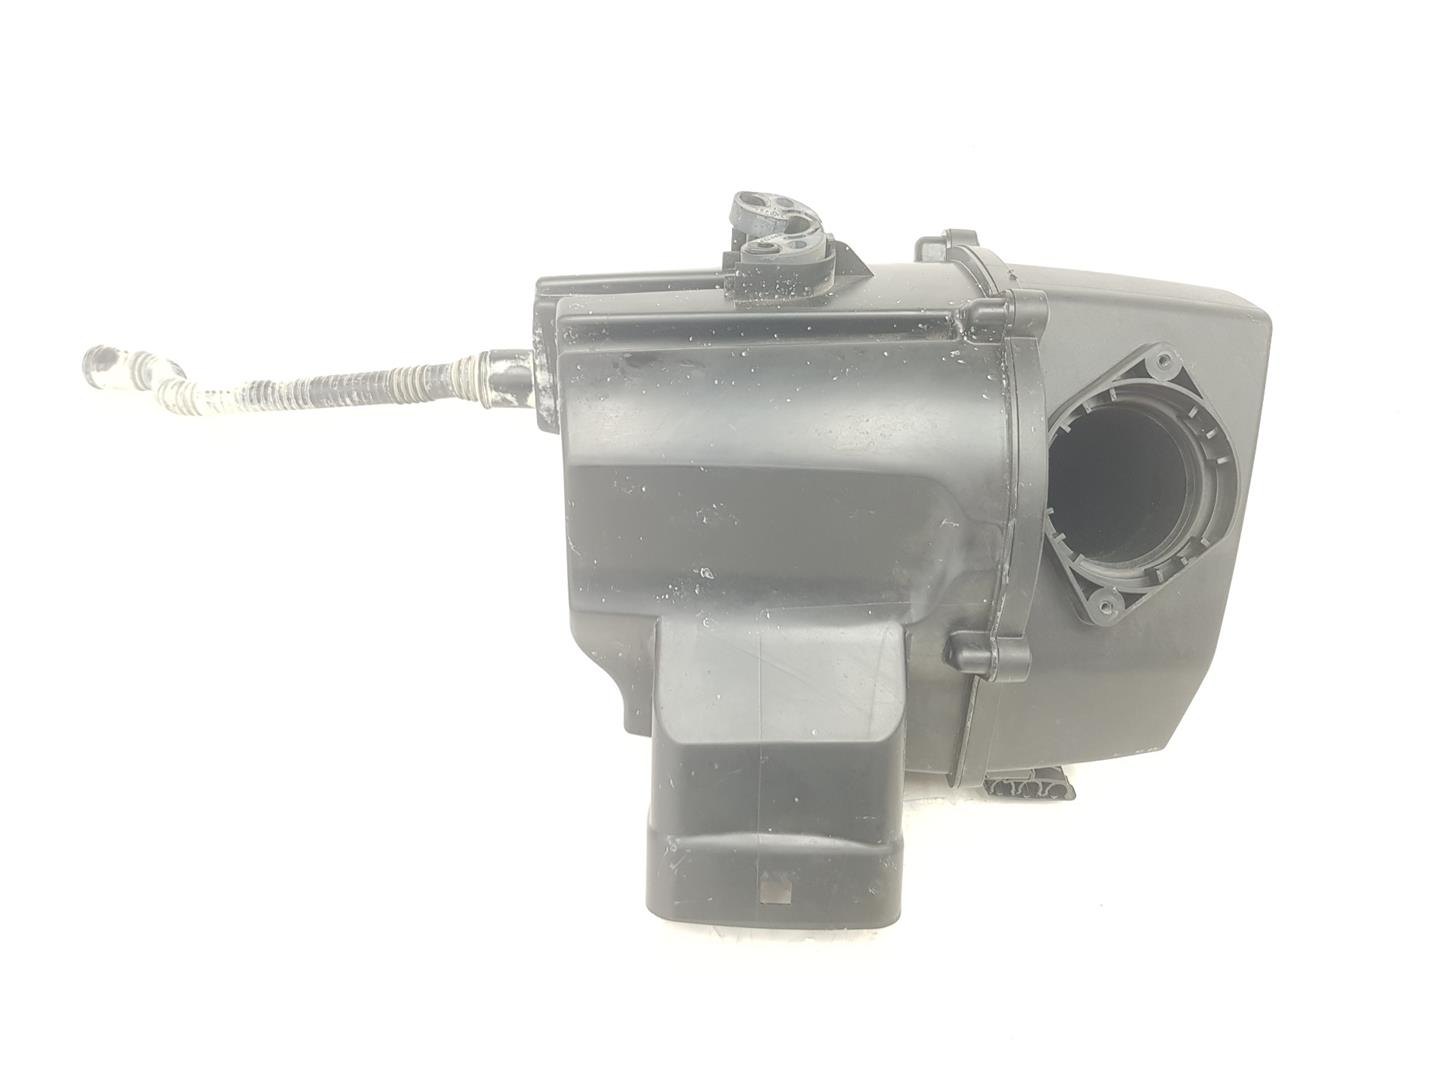 SEAT Ibiza 3 generation (2002-2008) Other Engine Compartment Parts 6R0129607E, 6R0129601C 24205124